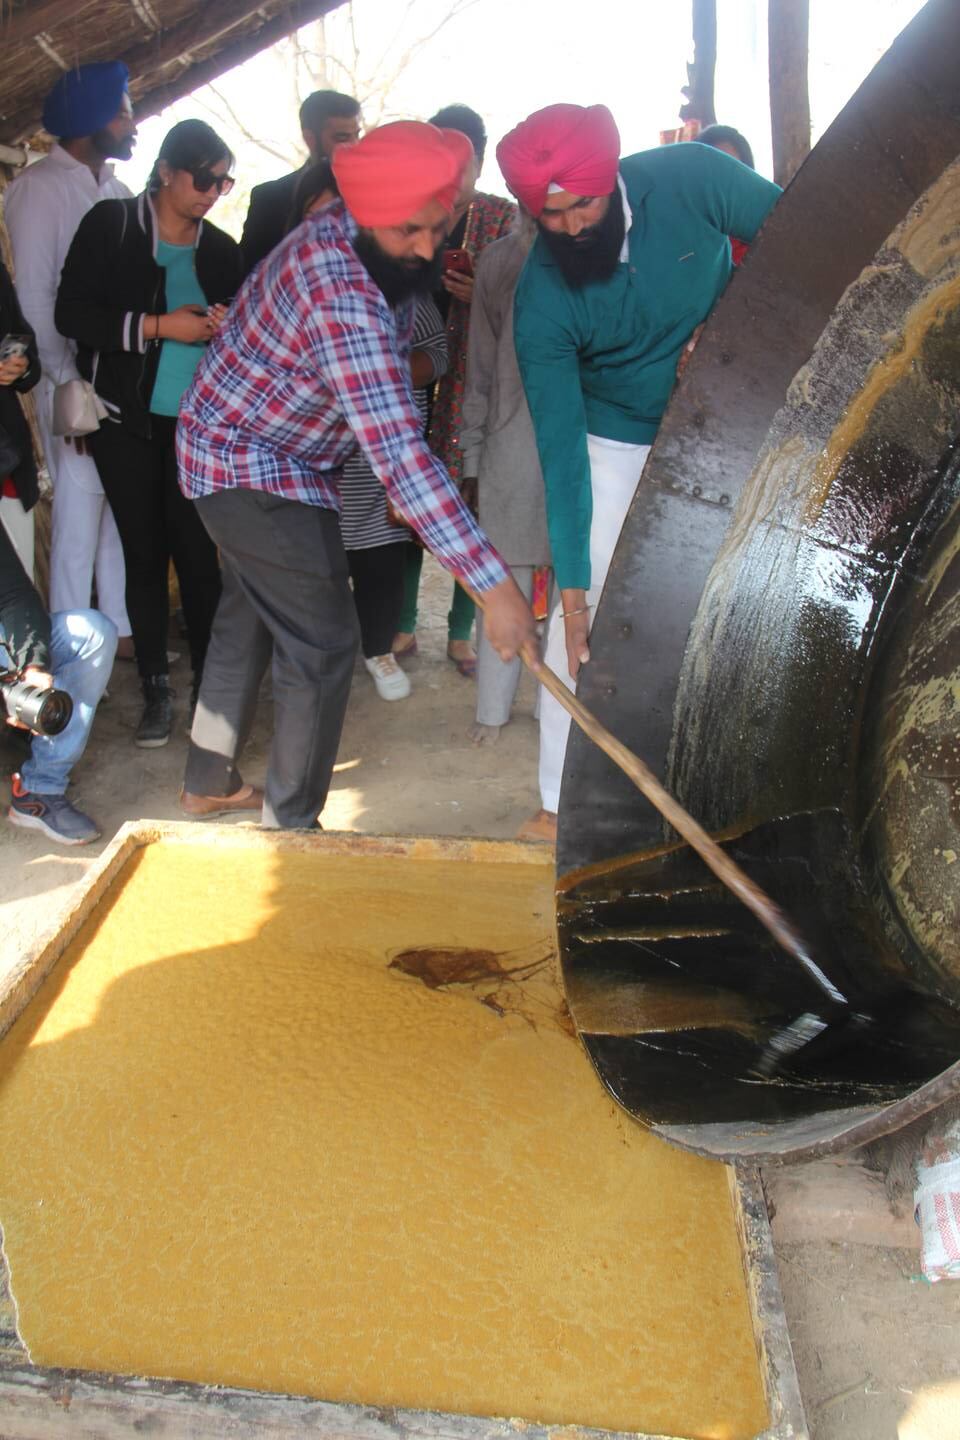 Jaggery being made from sugarcane pulp in a village in Punjab, India. Kalpana Sunder for The National 